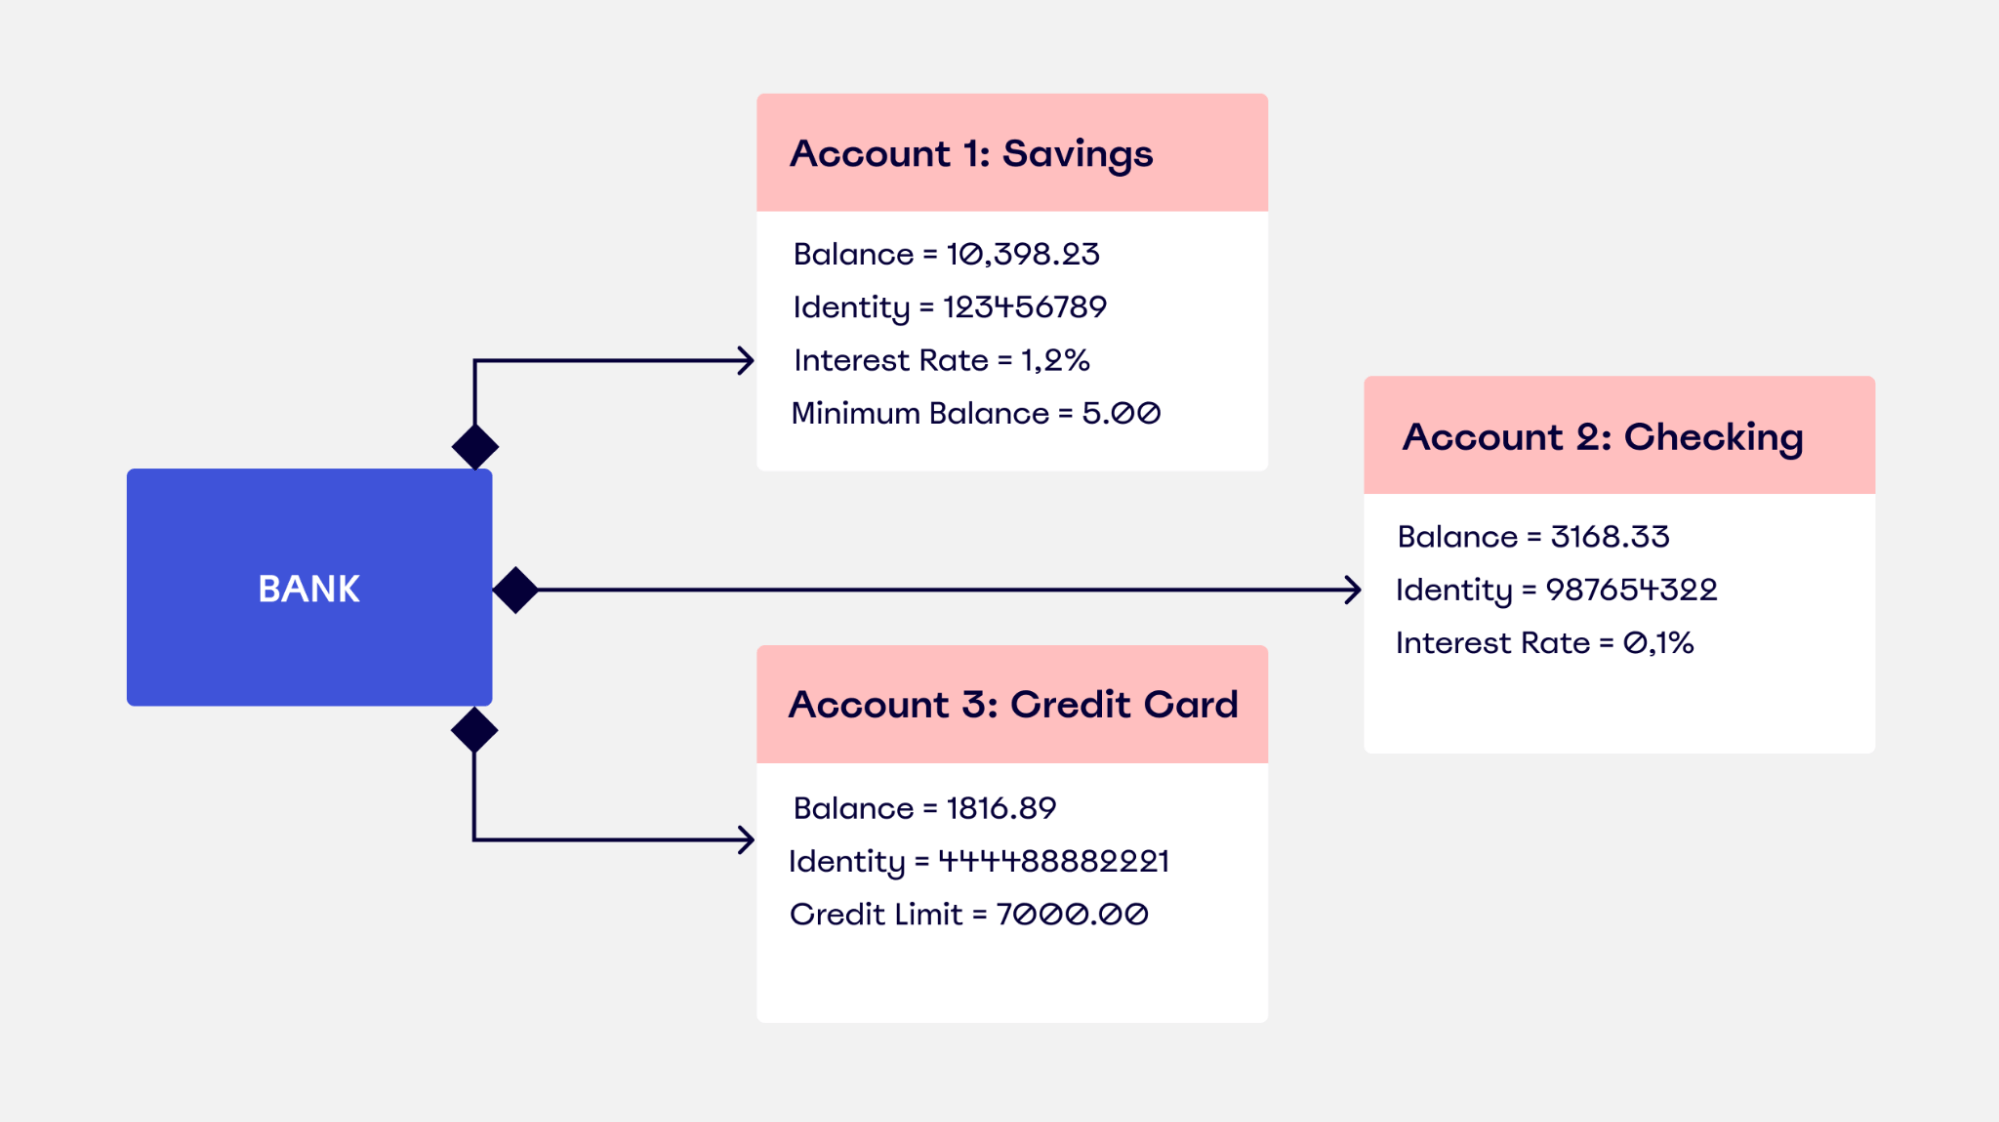 Image of a UML object diagram for banking